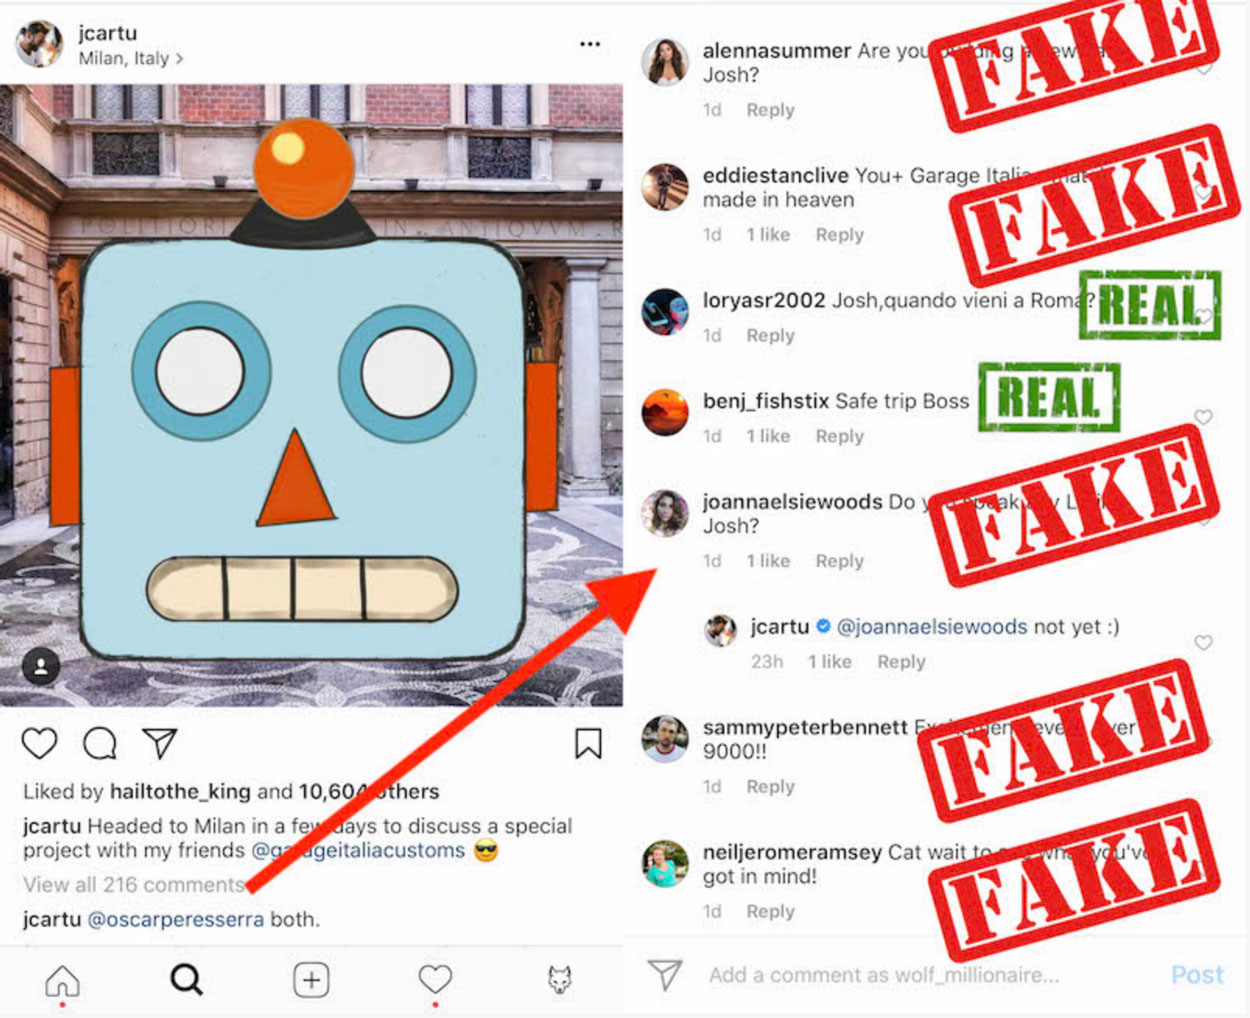 Facebook Giveaway Bot proguidescounterstrike.83584 Giveaway Bot  proguidescounterstrike.83584 - Instagram followers - posts You don't follow  each other on Instagram New Instagram account View Profile Congratulations!  (this is a bot from